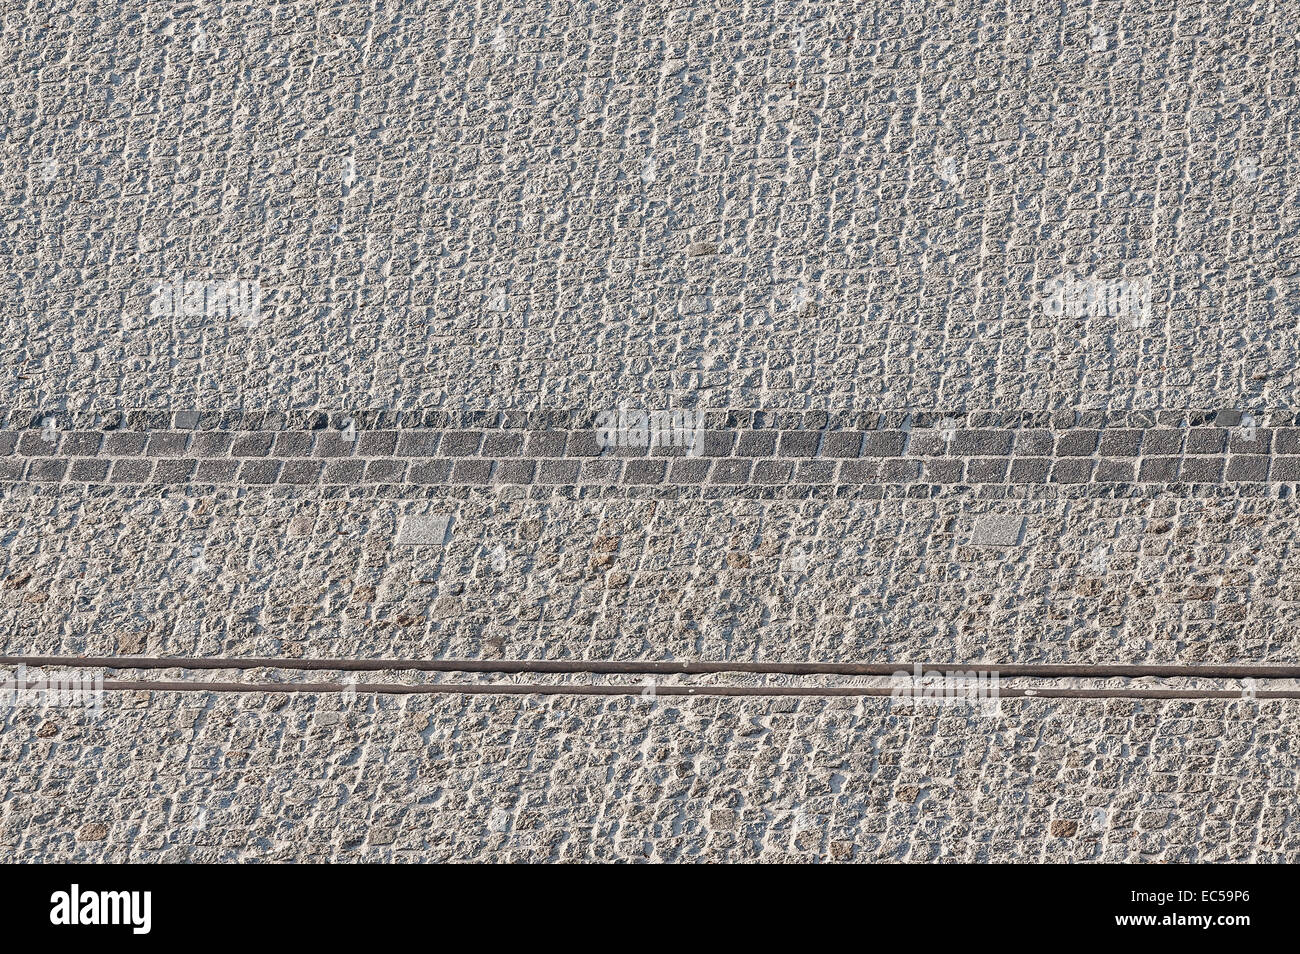 Tiled pavement aerial view, background or texture. Stock Photo